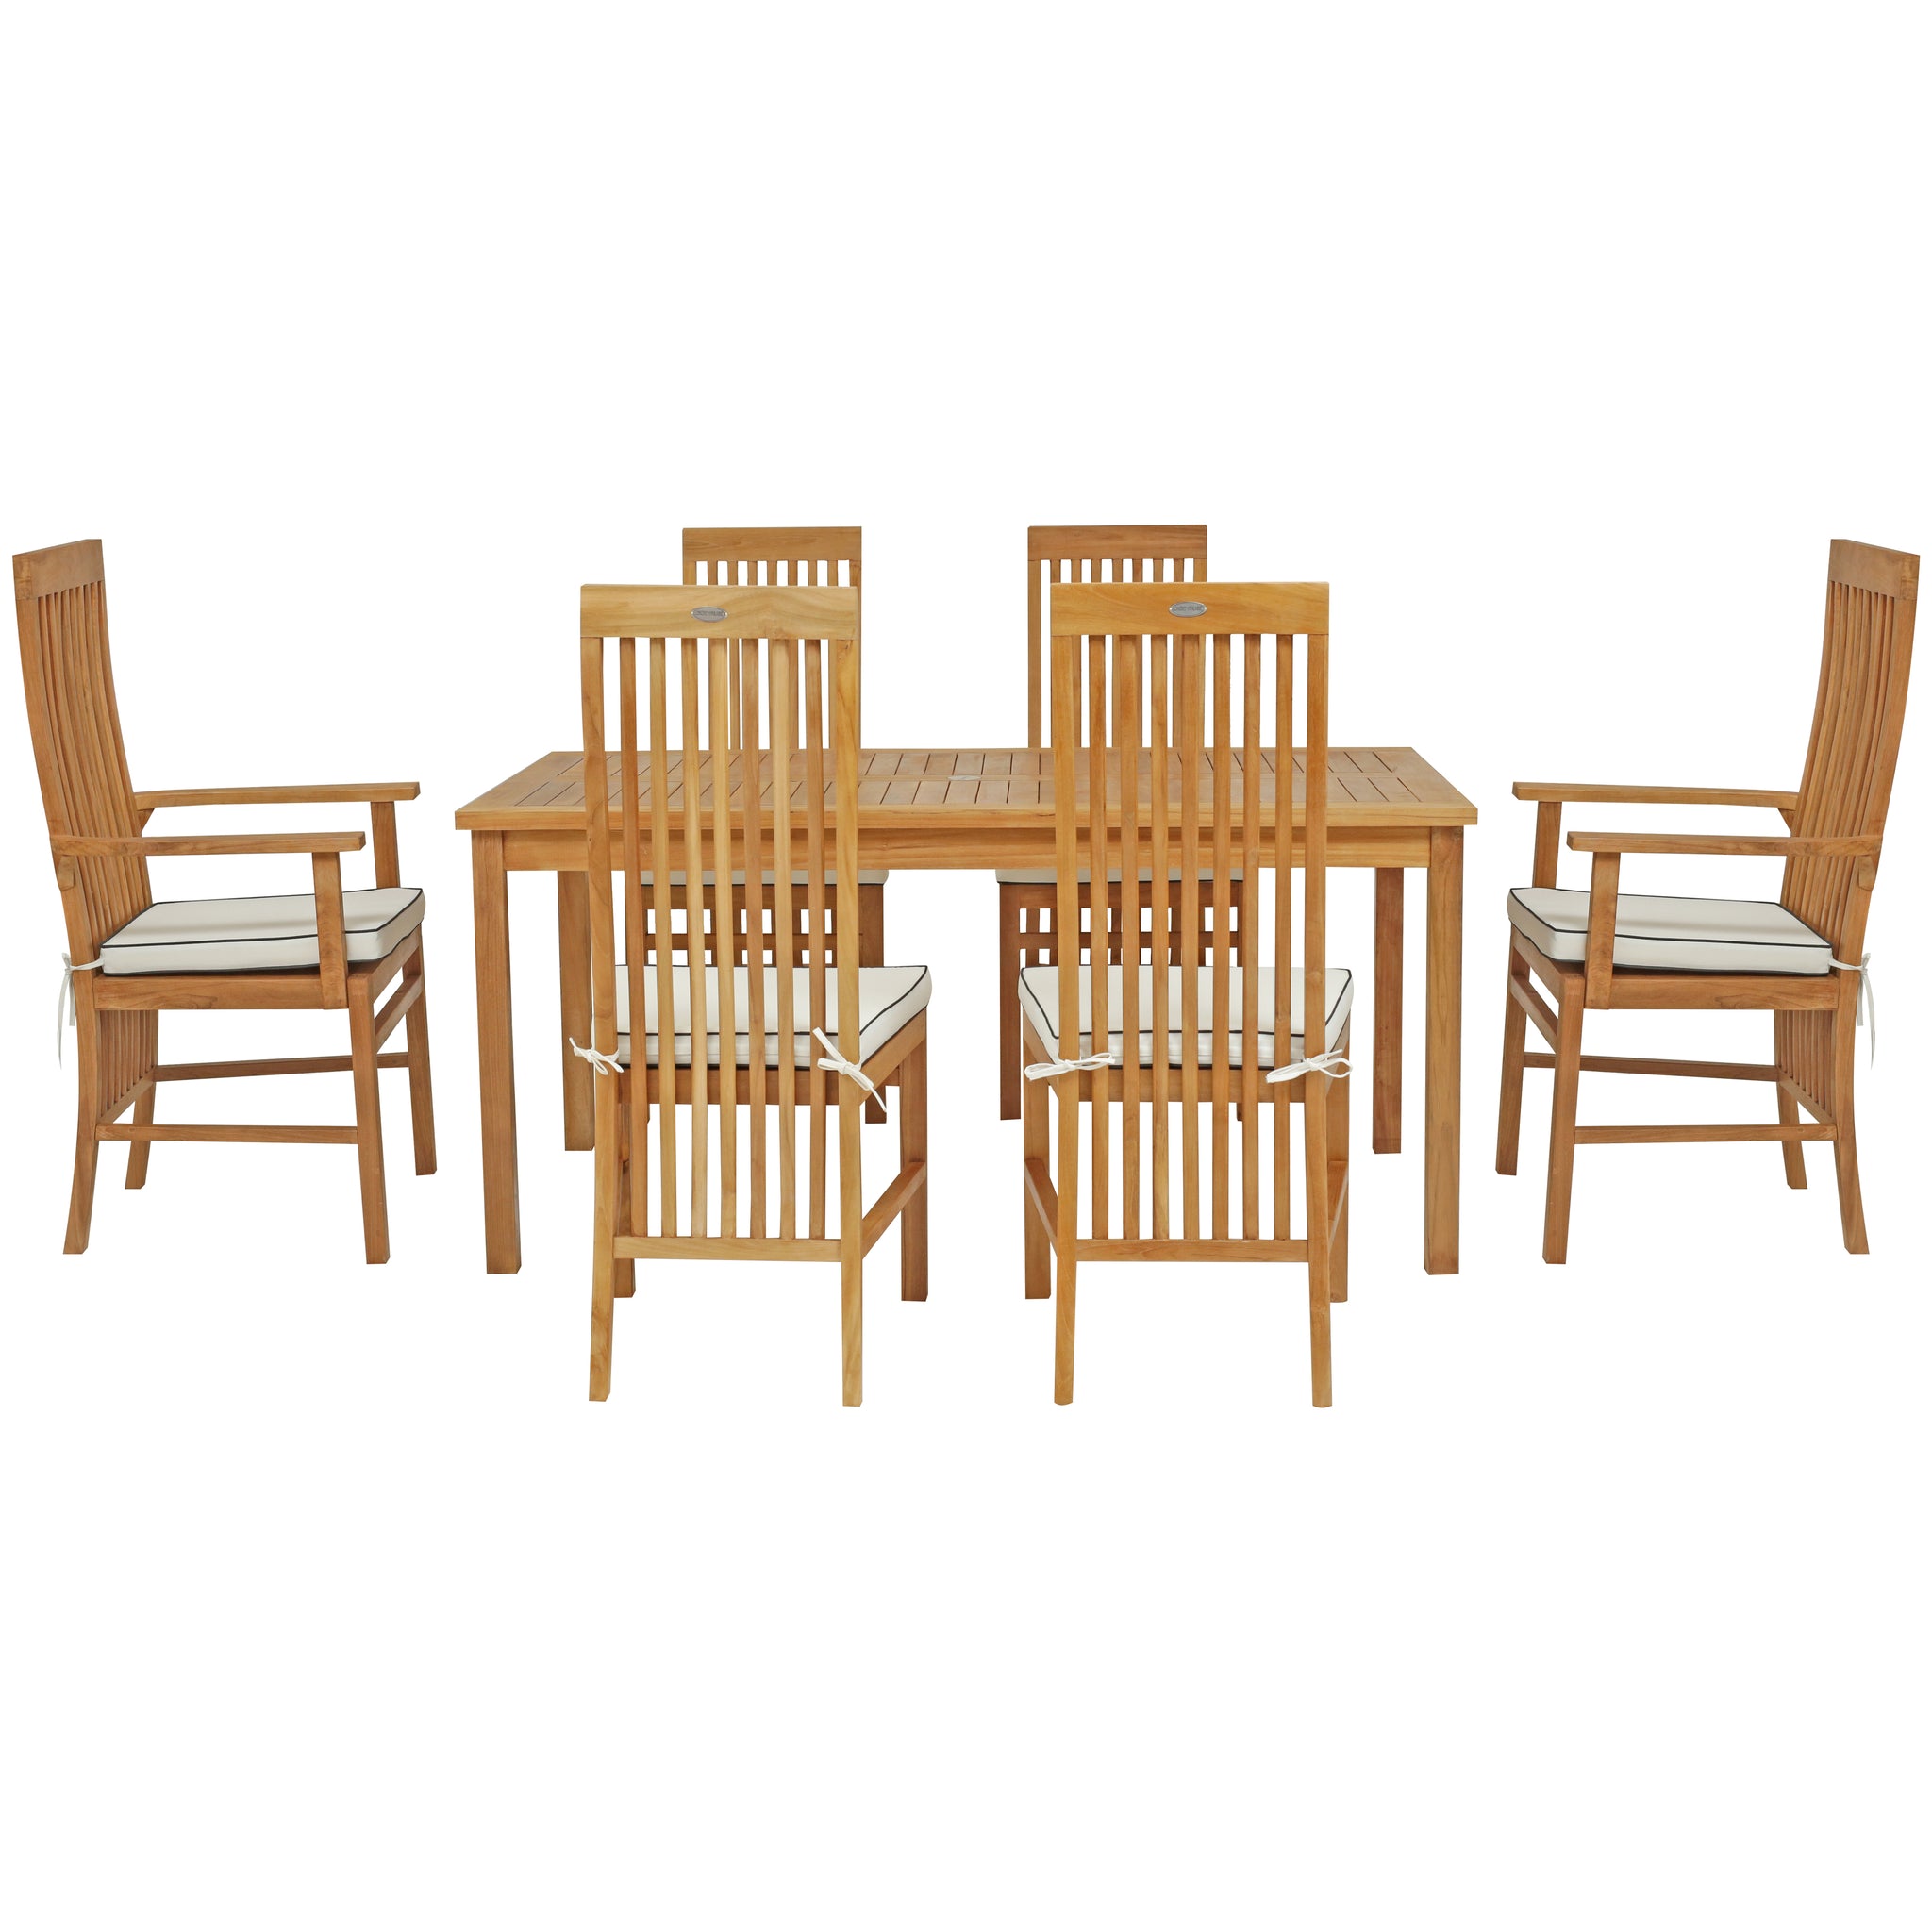 7 Piece Teak Wood West Palm 63" Patio Bistro Dining Set with 2 Arm Chairs and 4 Side Chairs by ...